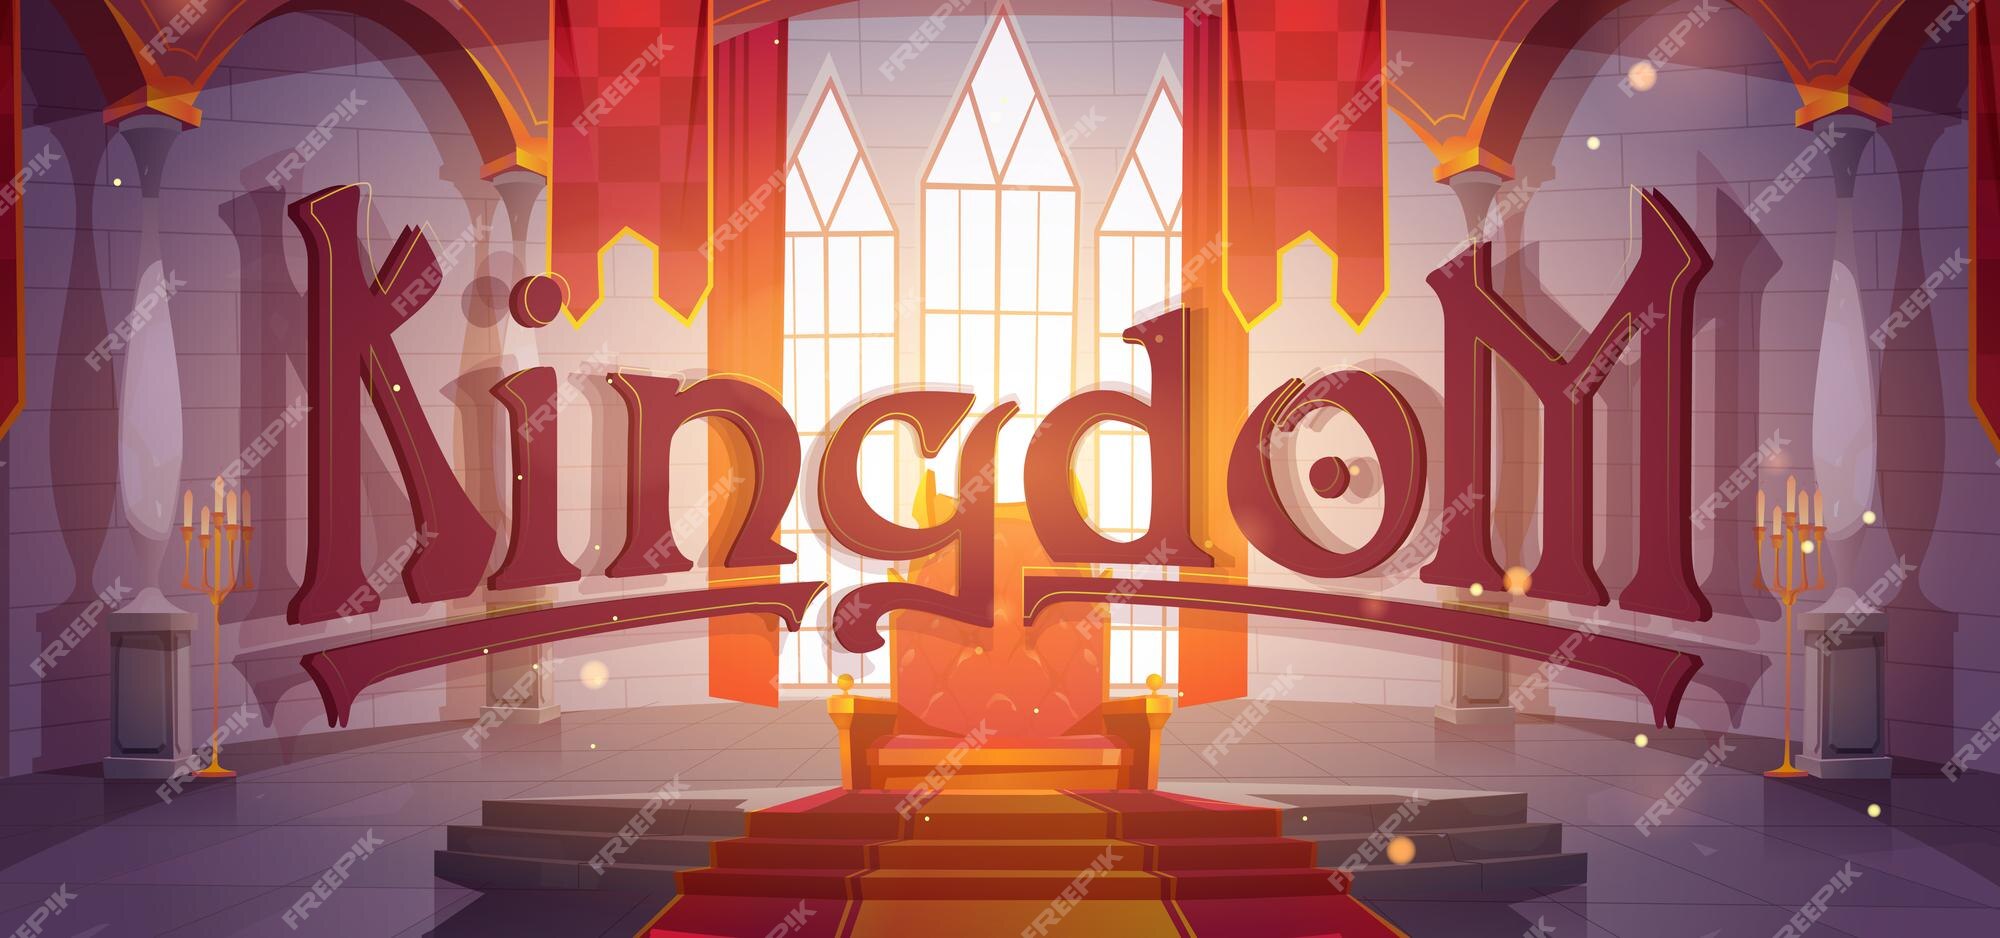 Free Vector | Kingdom cartoon banner, medieval castle hall interior with  king royal throne, red flags and arch windows. computer game background,  book cover with fantasy palace, fairy tale story vector illustration